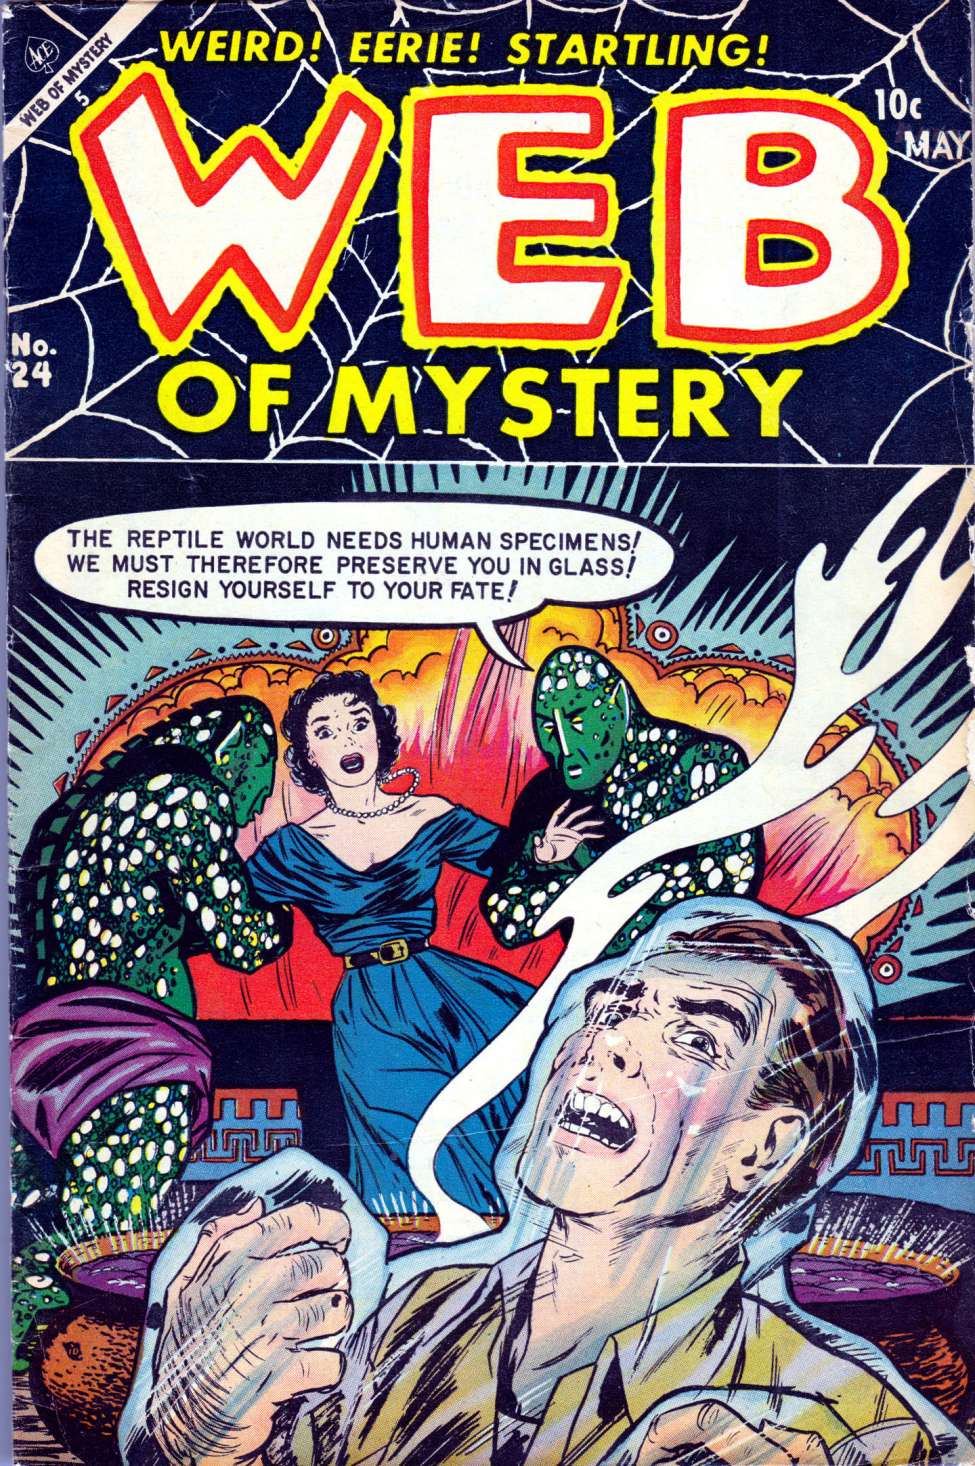 Book Cover For Web Of Mystery 24 (alt) - Version 2